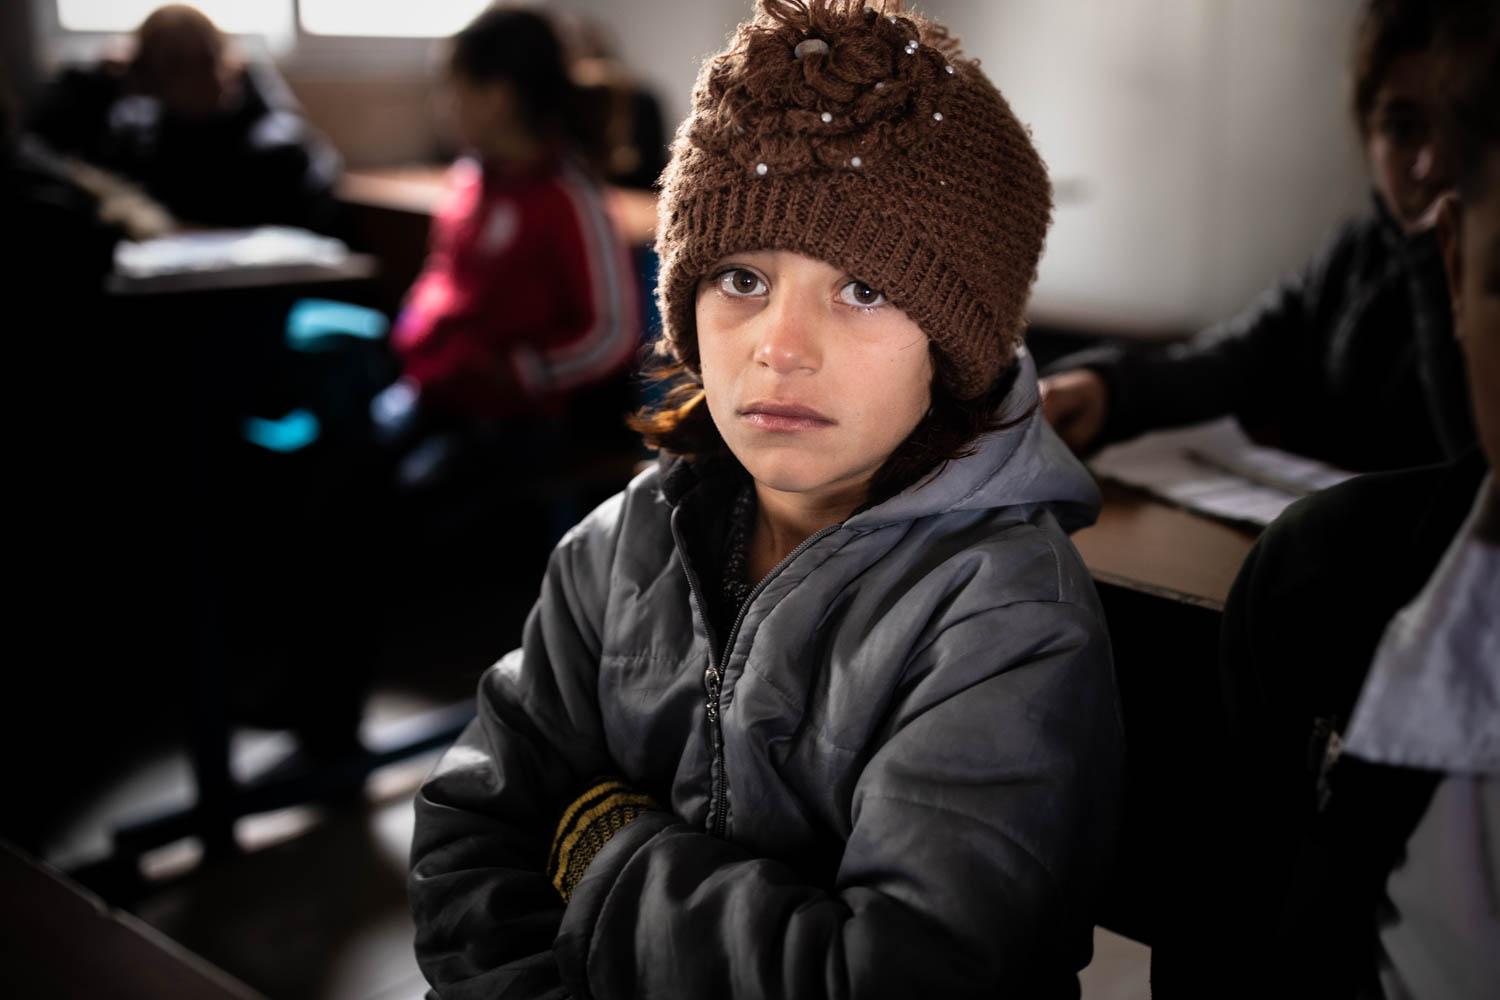 Education Whilst Displaced - Runa is one of six children and the only in her family...